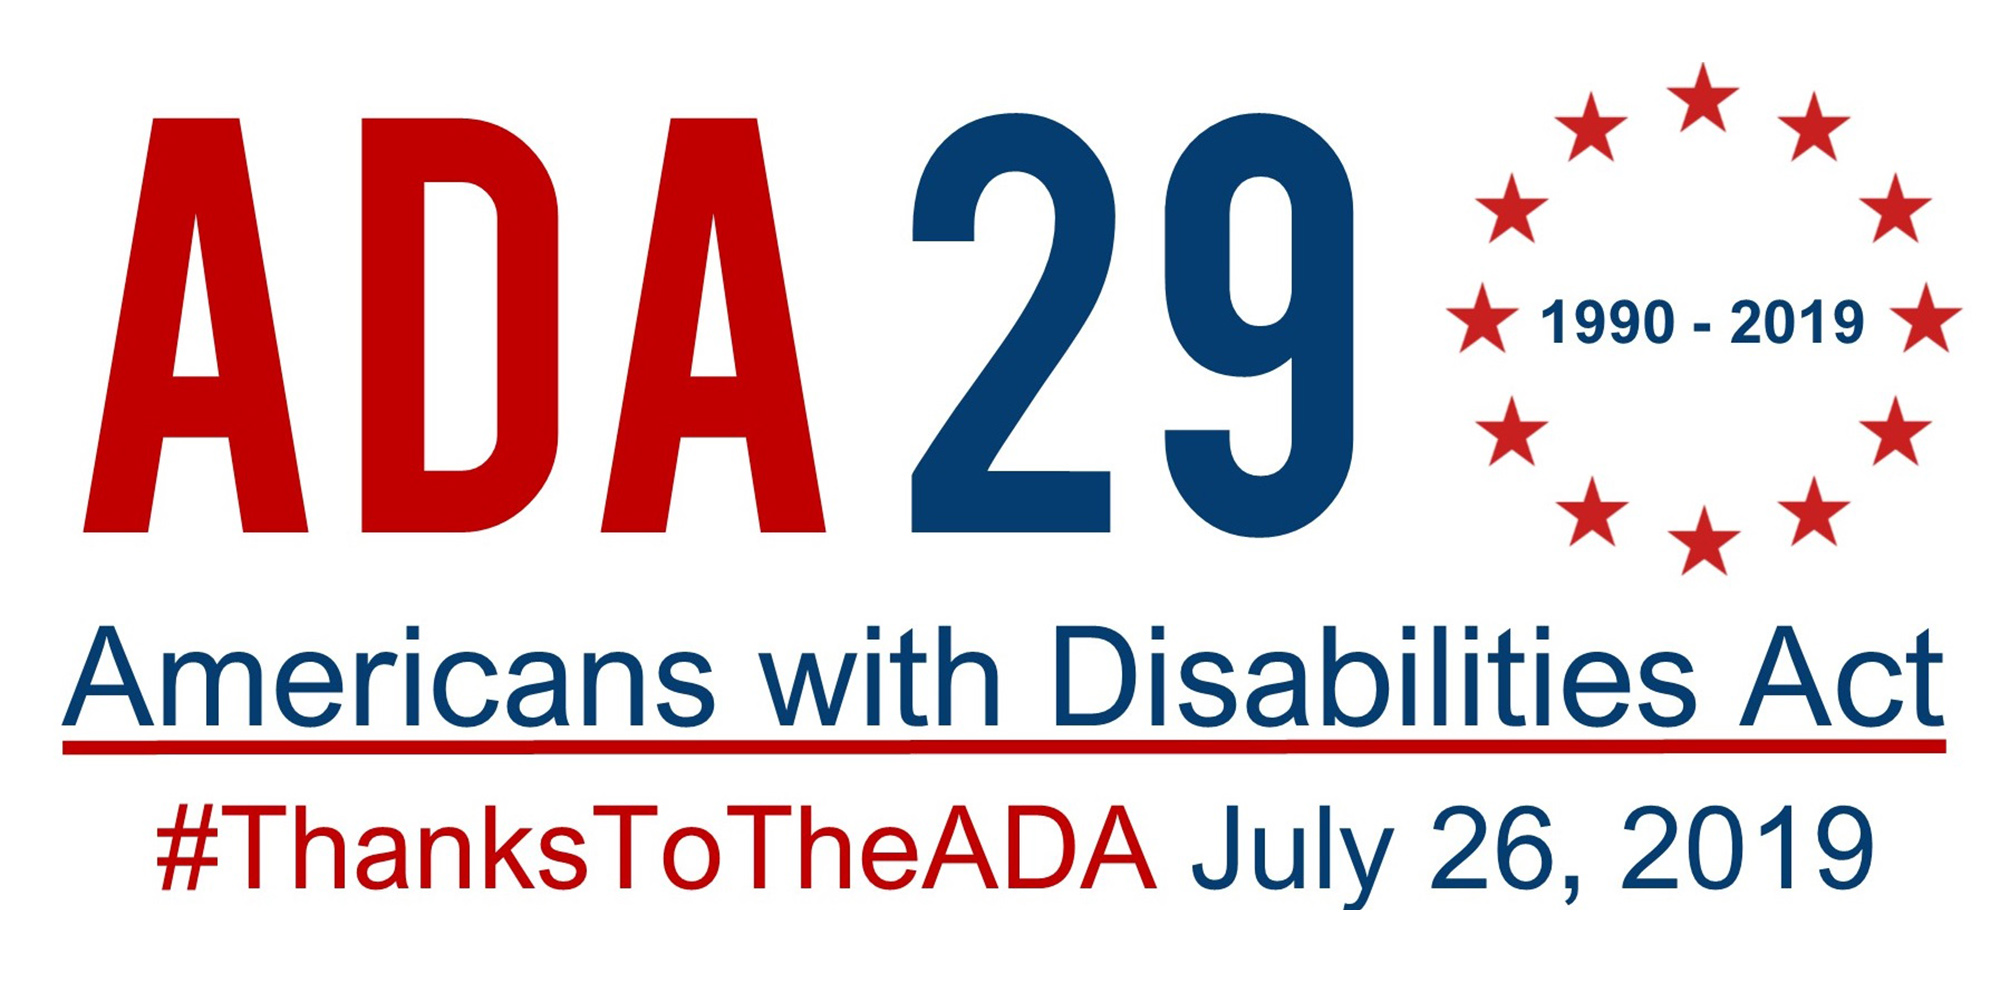 #ThanksToTheADA for ADA 29 (1990-2019) Americans with Disabilities Act - July 26, 2019 